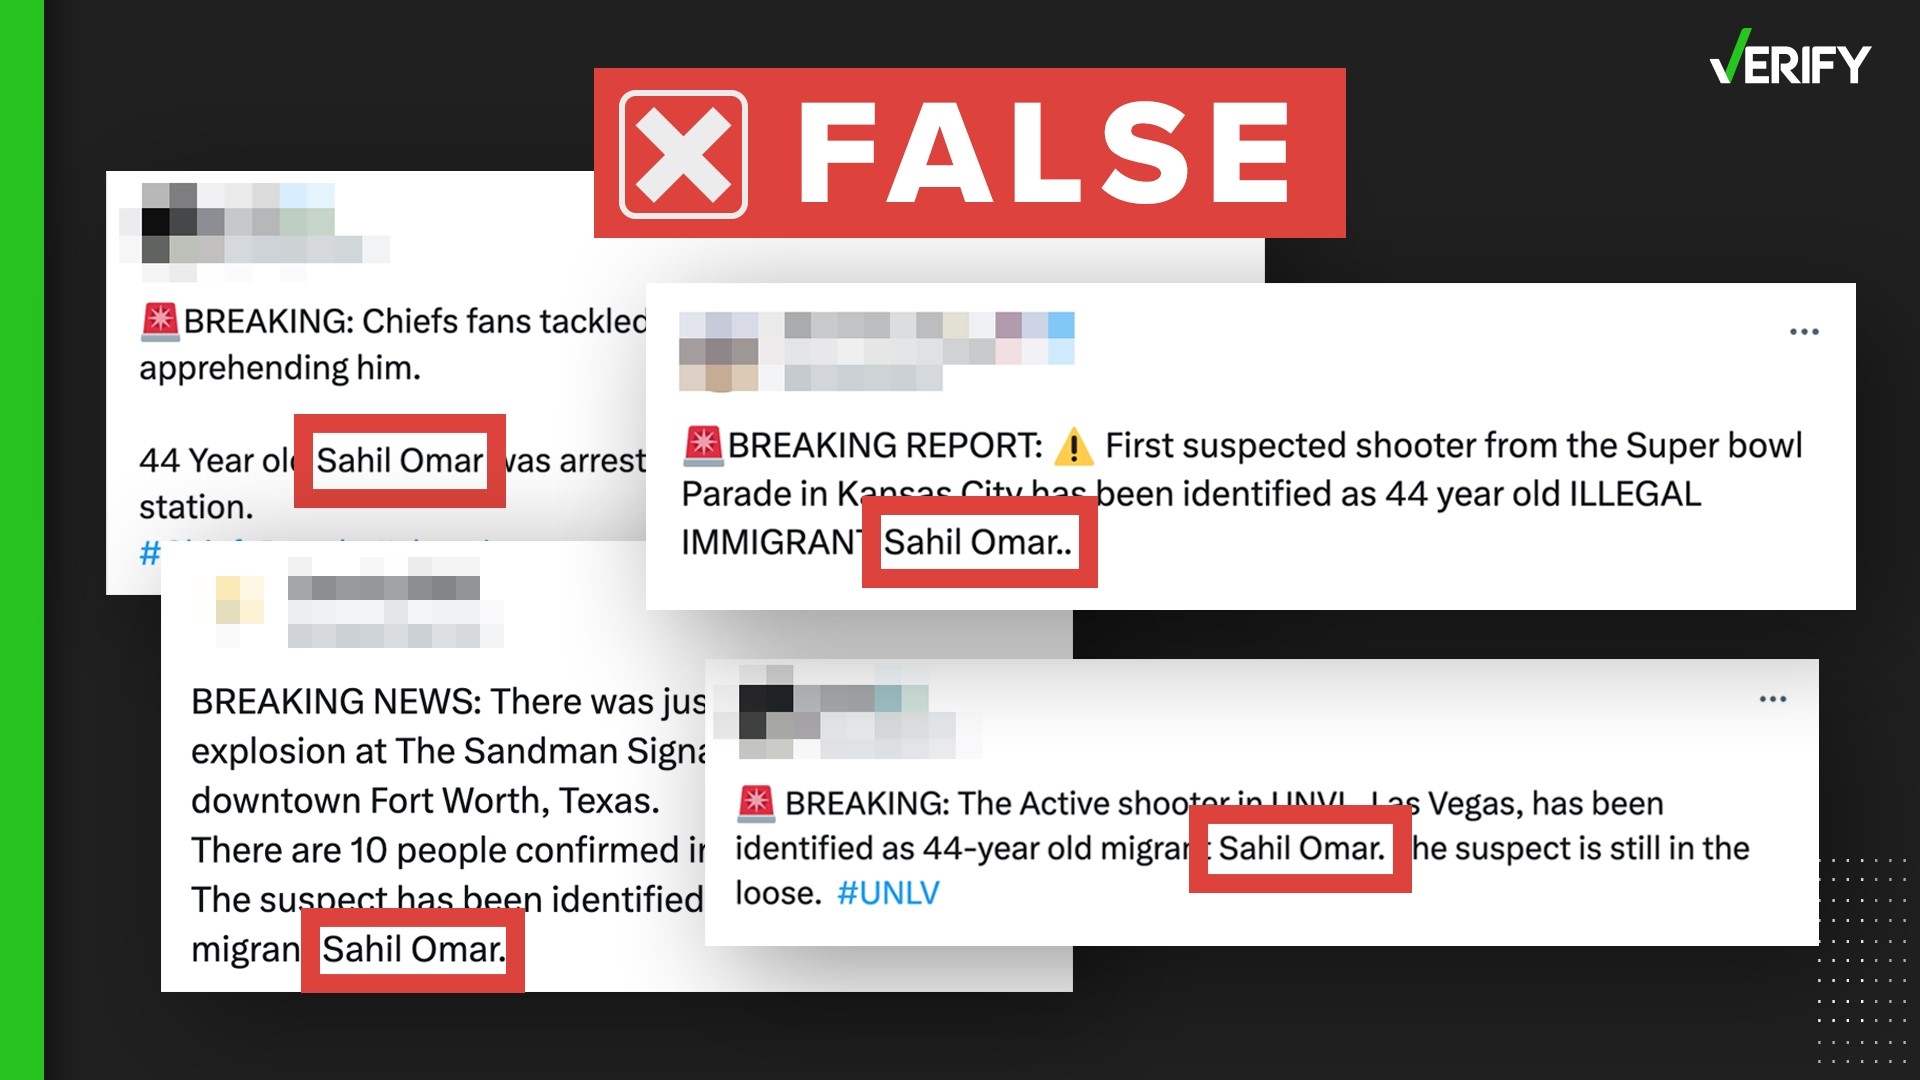 Posts falsely claim a 44-year-old immigrant was behind the Kansas City Super Bowl parade shooting and other crimes. There’s no evidence Sahil Omar exists.